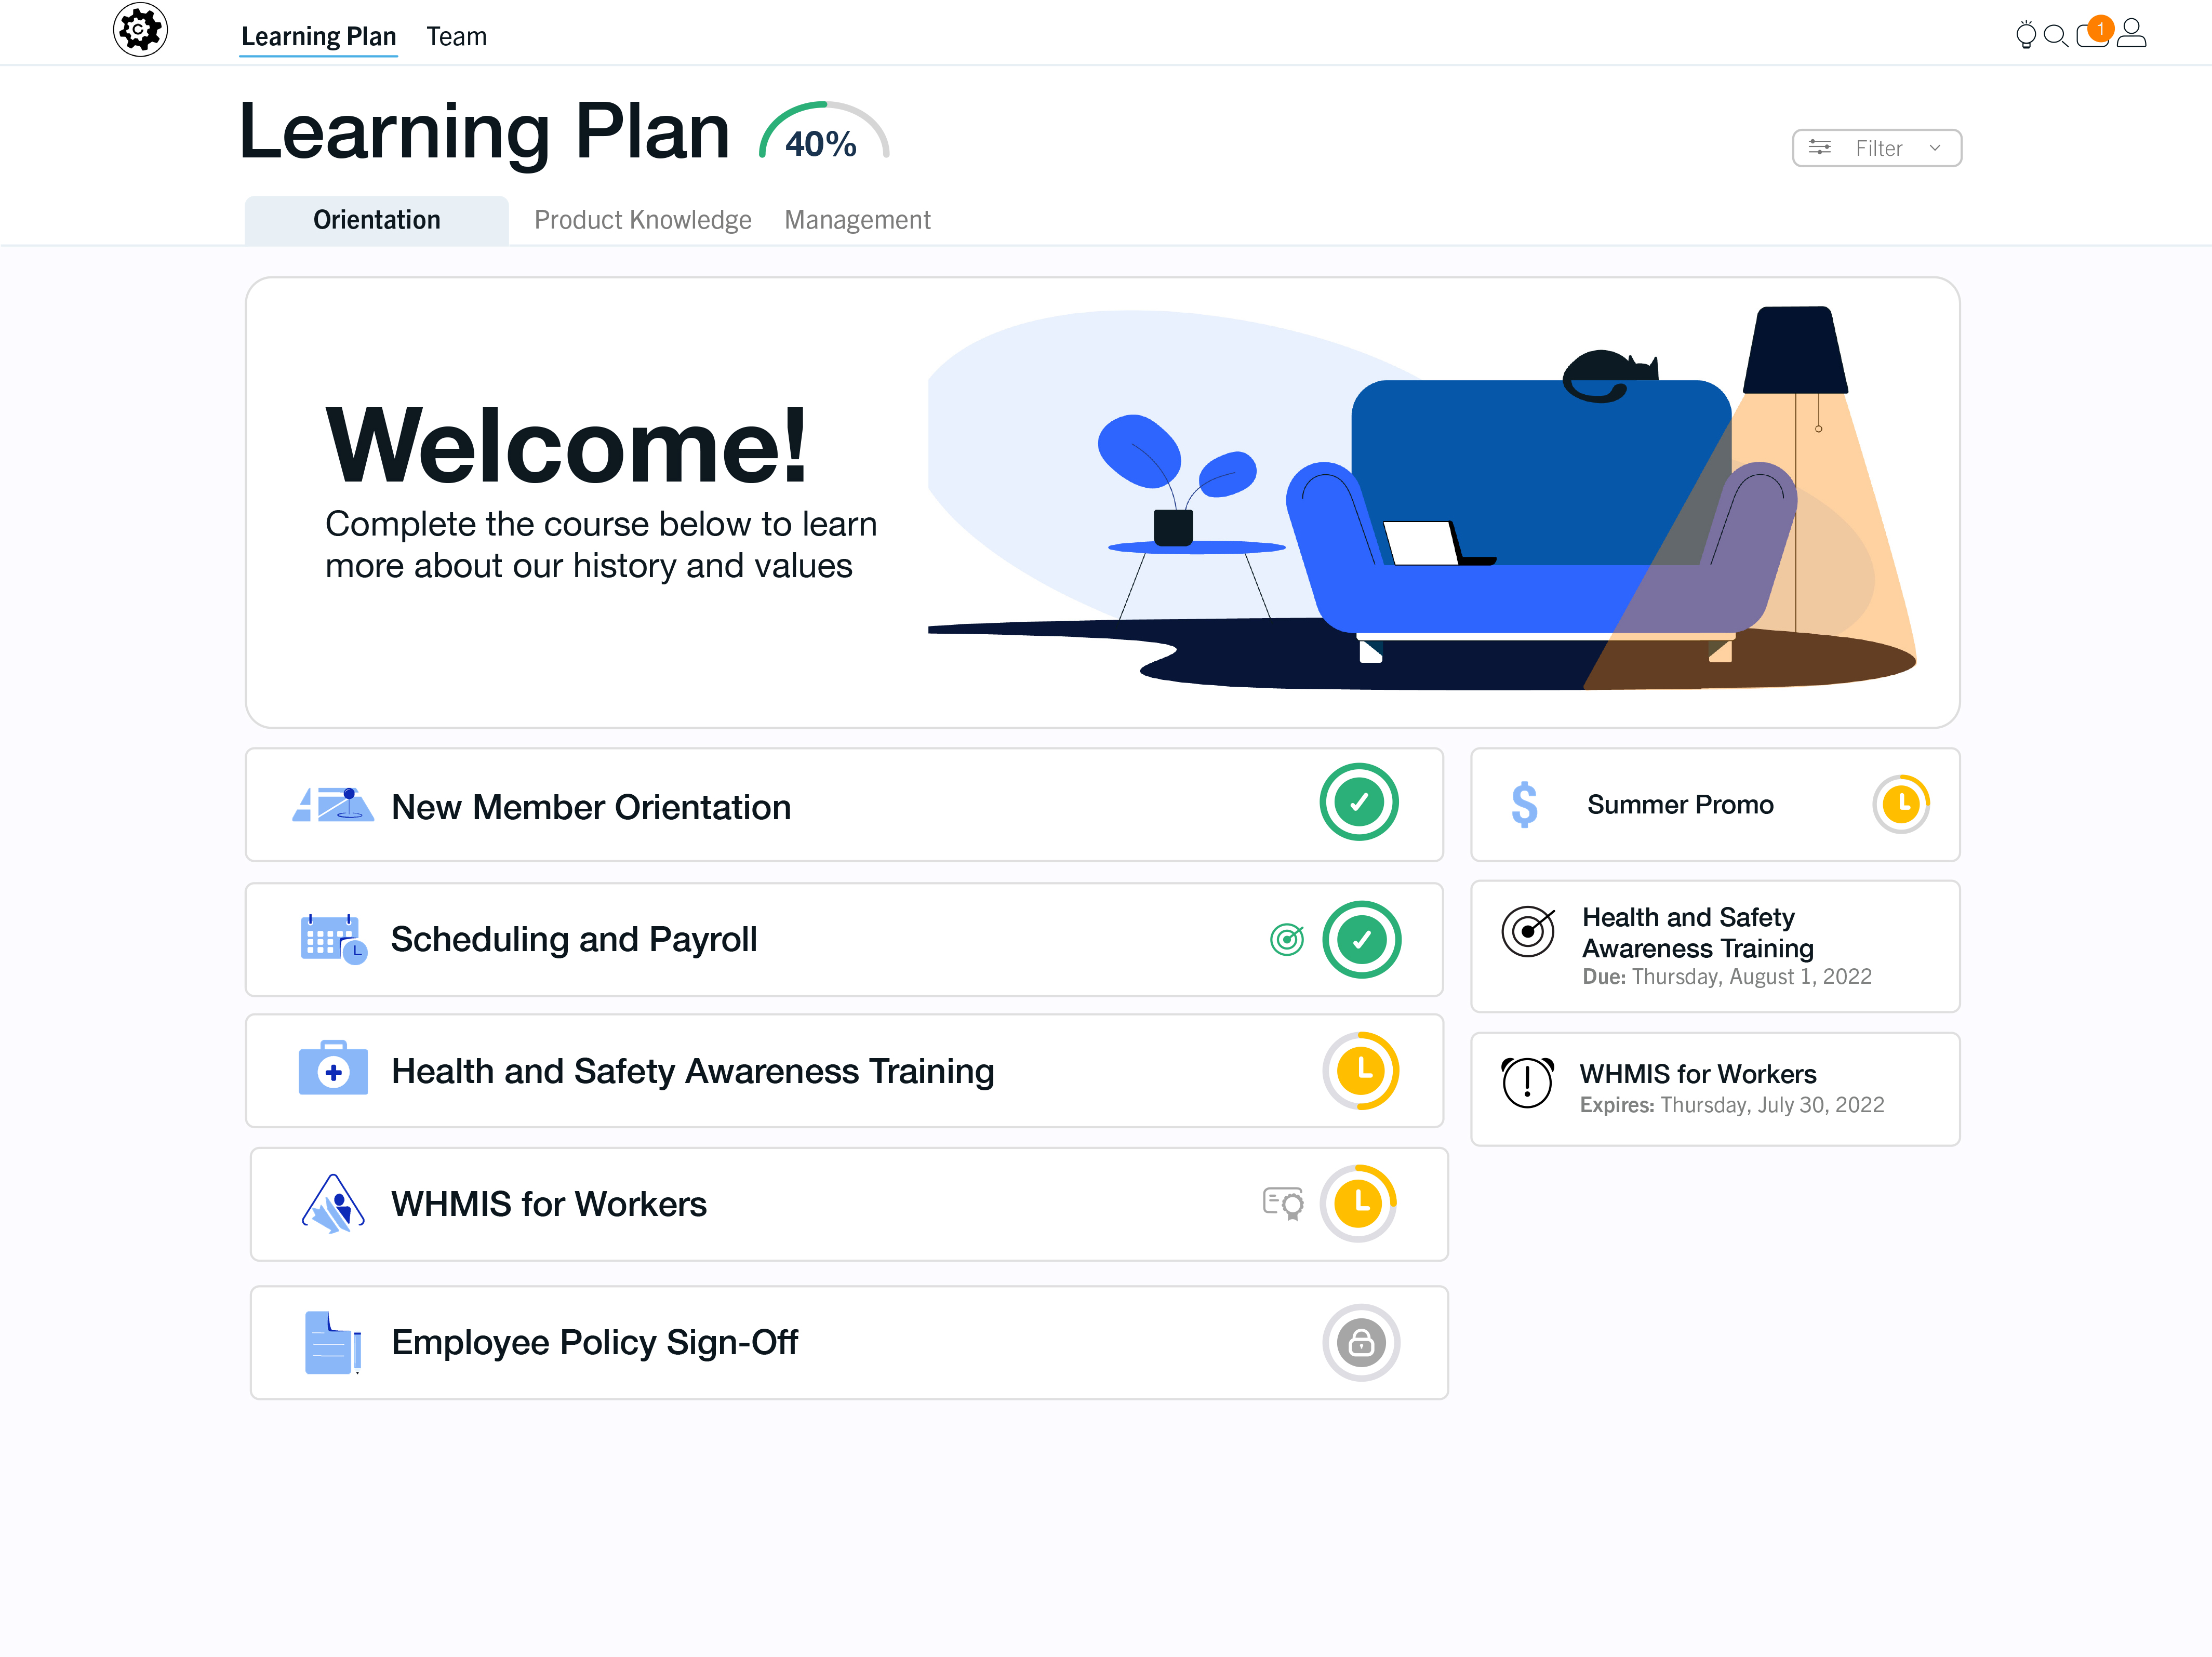 Fabric LMS Learning Plan